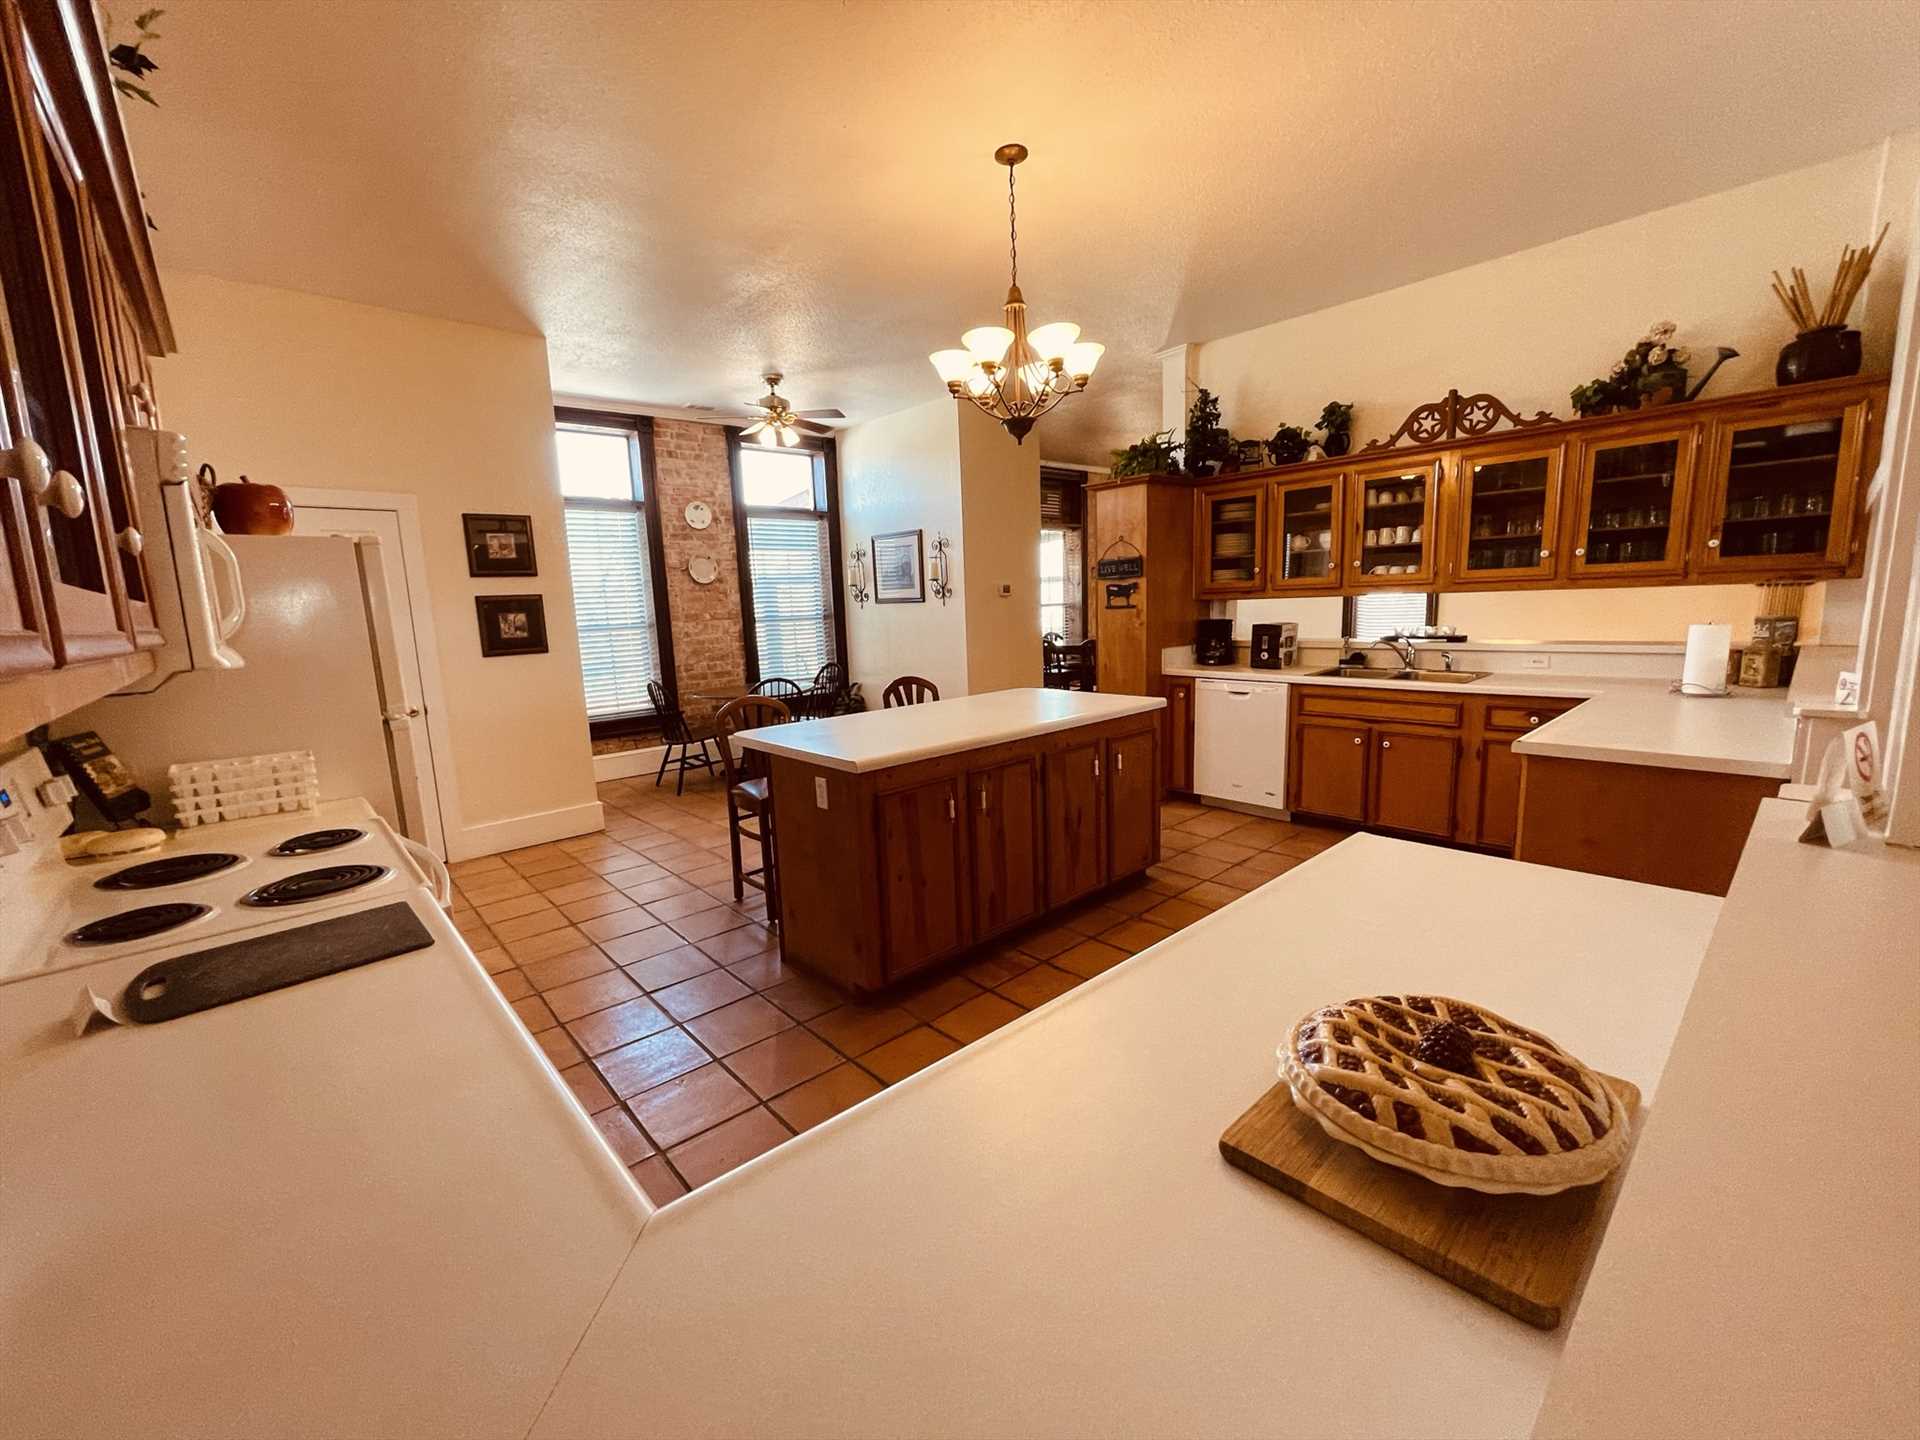                                                 Just imagine the family meals and memories you'll be able to create here at the Lodge!